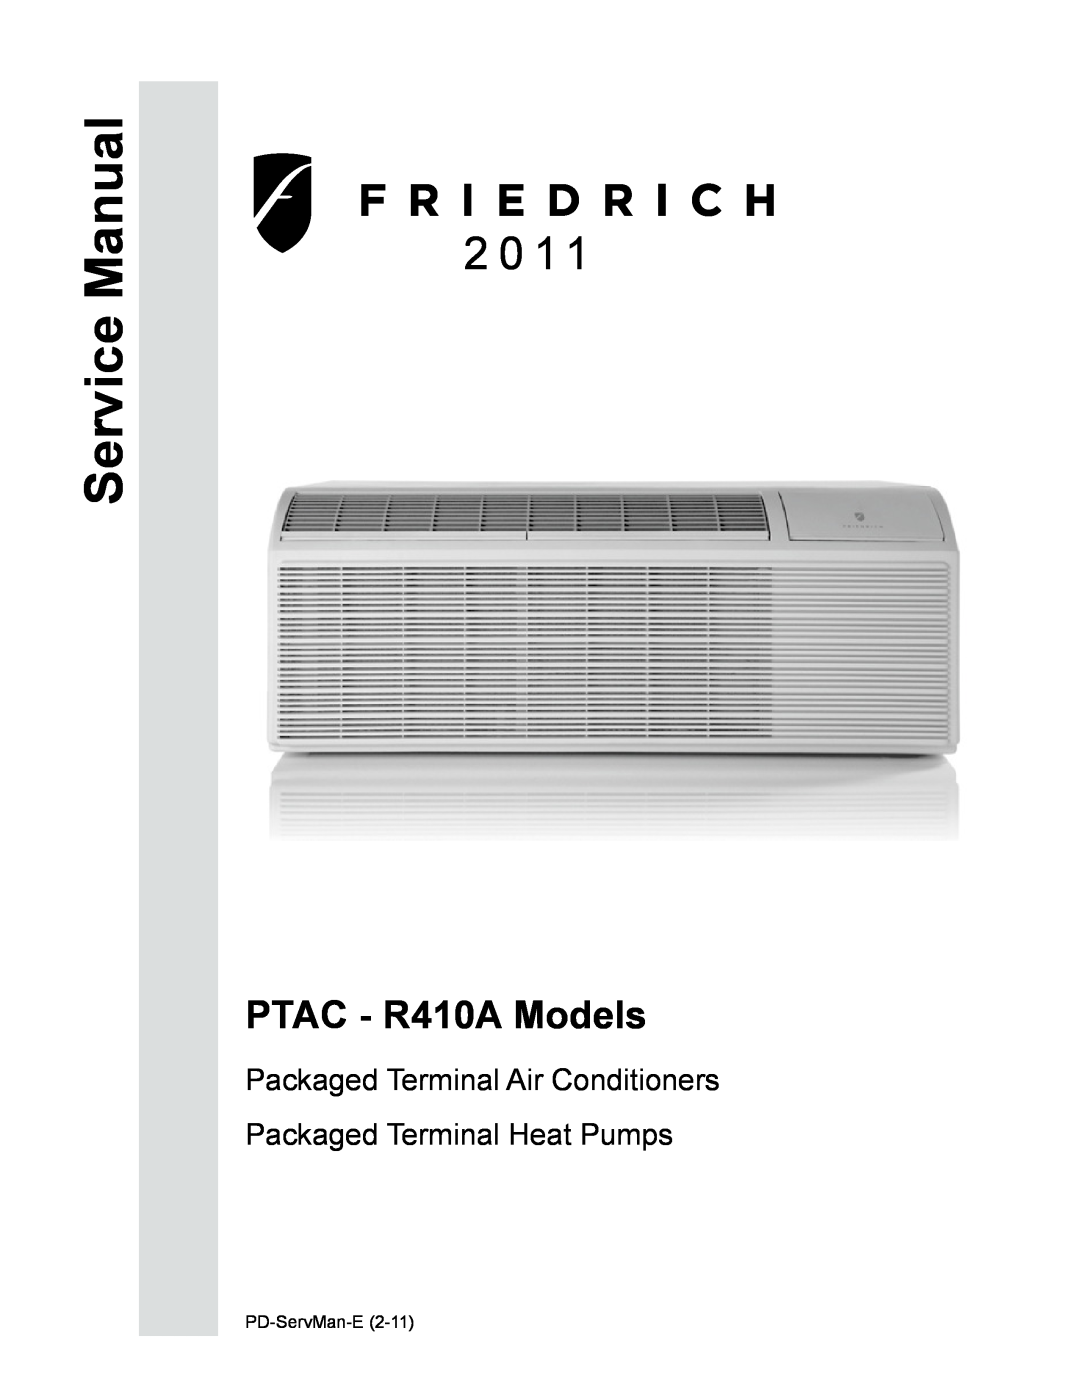 Friedrich PTAC - R410A service manual Packaged Terminal Air Conditioners, Packaged Terminal Heat Pumps 